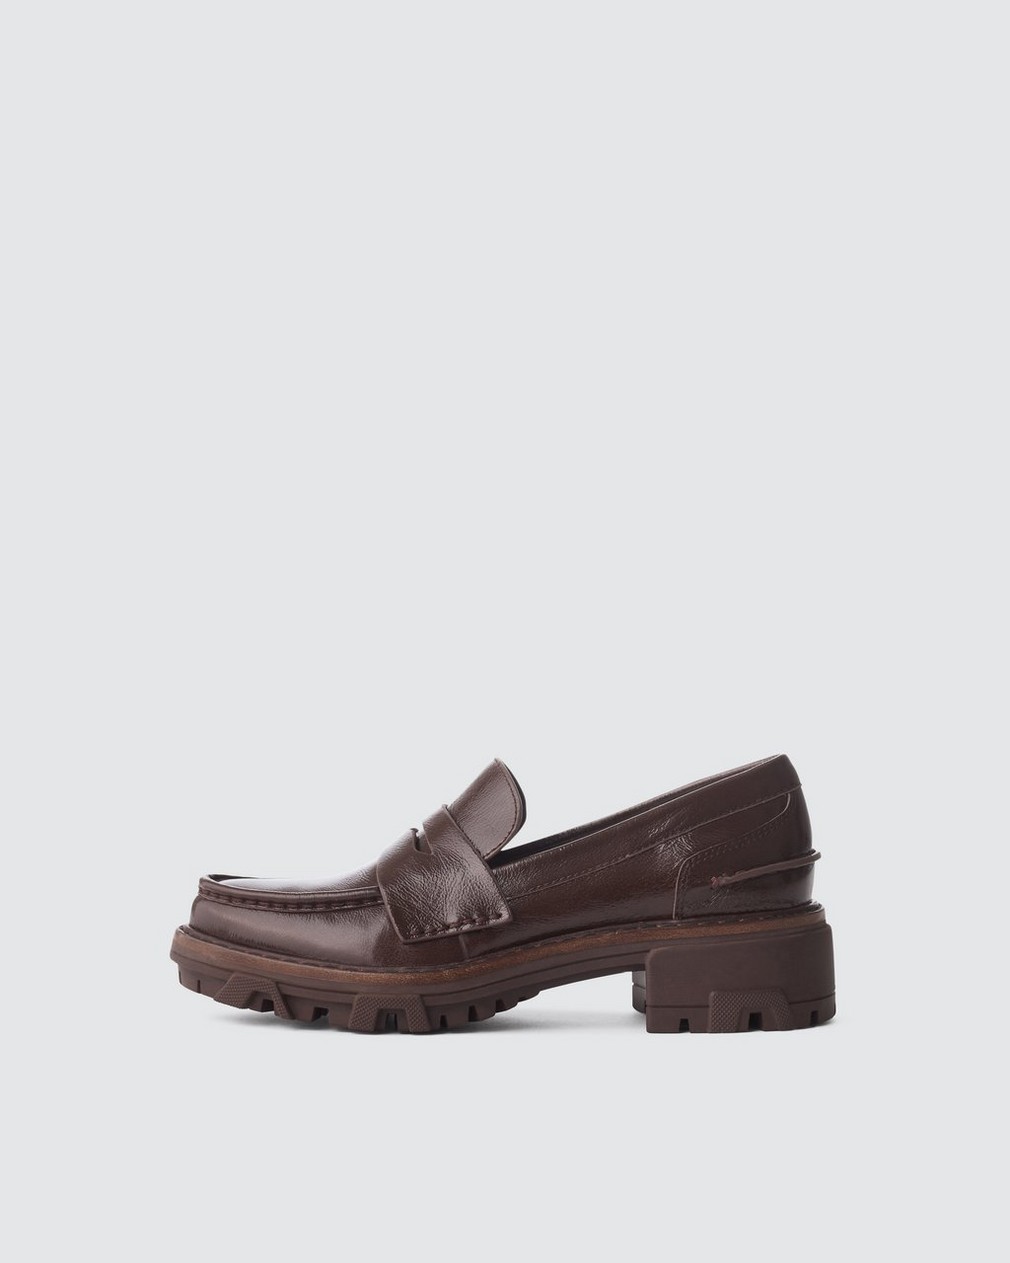 Shiloh Loafer - Patent Leather